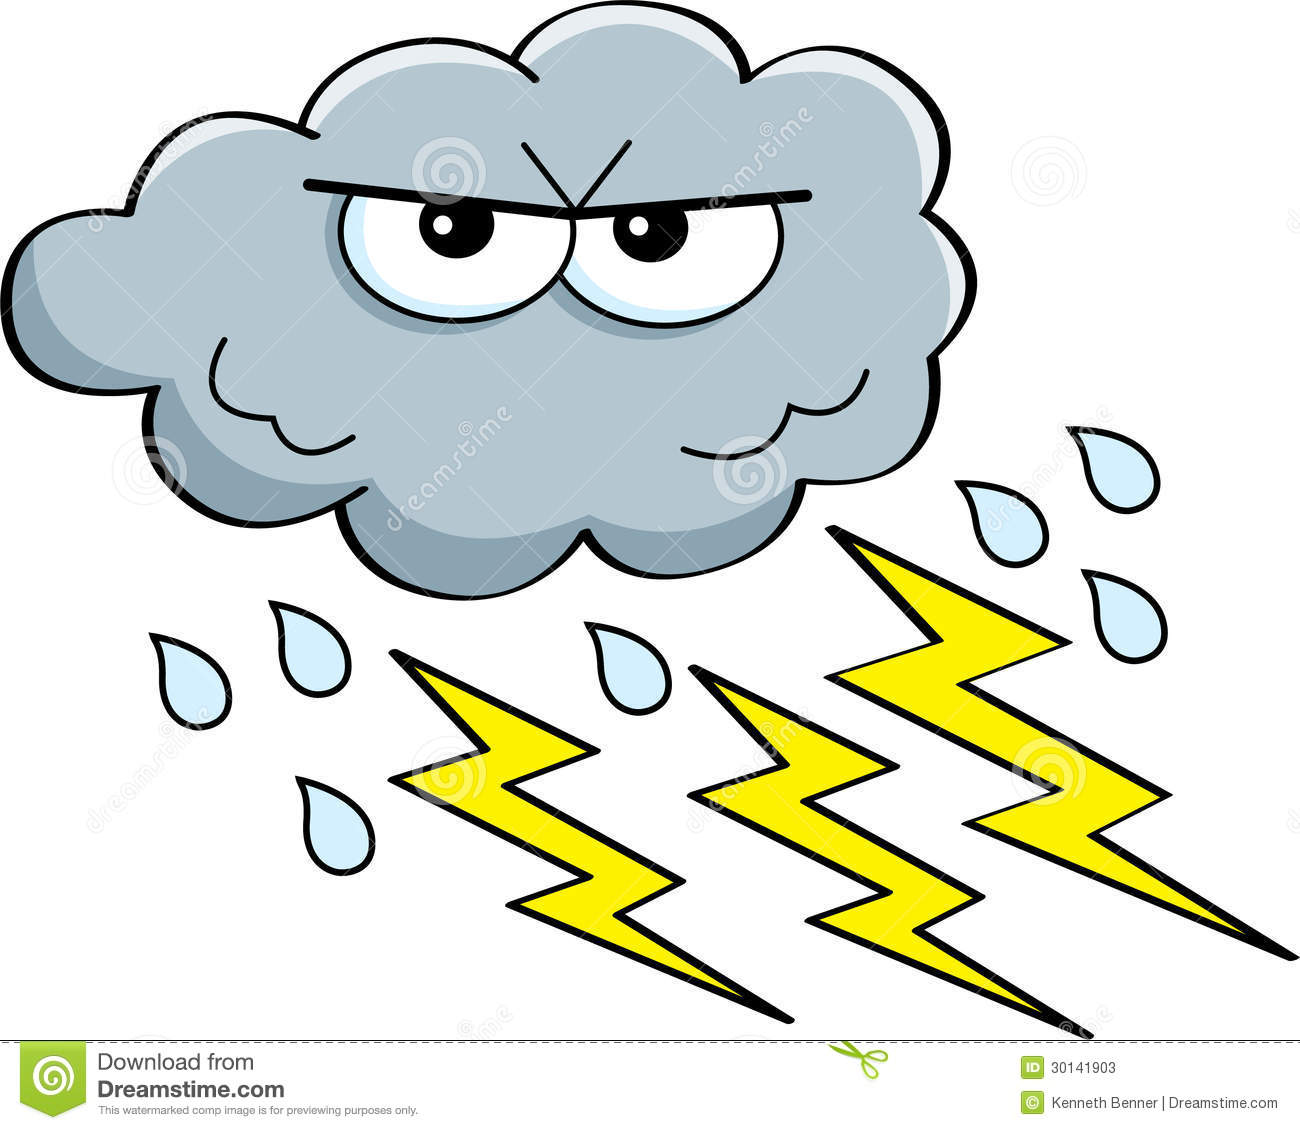 Cartoon Illustration Of A Storm Cloud With Rain And Lightning